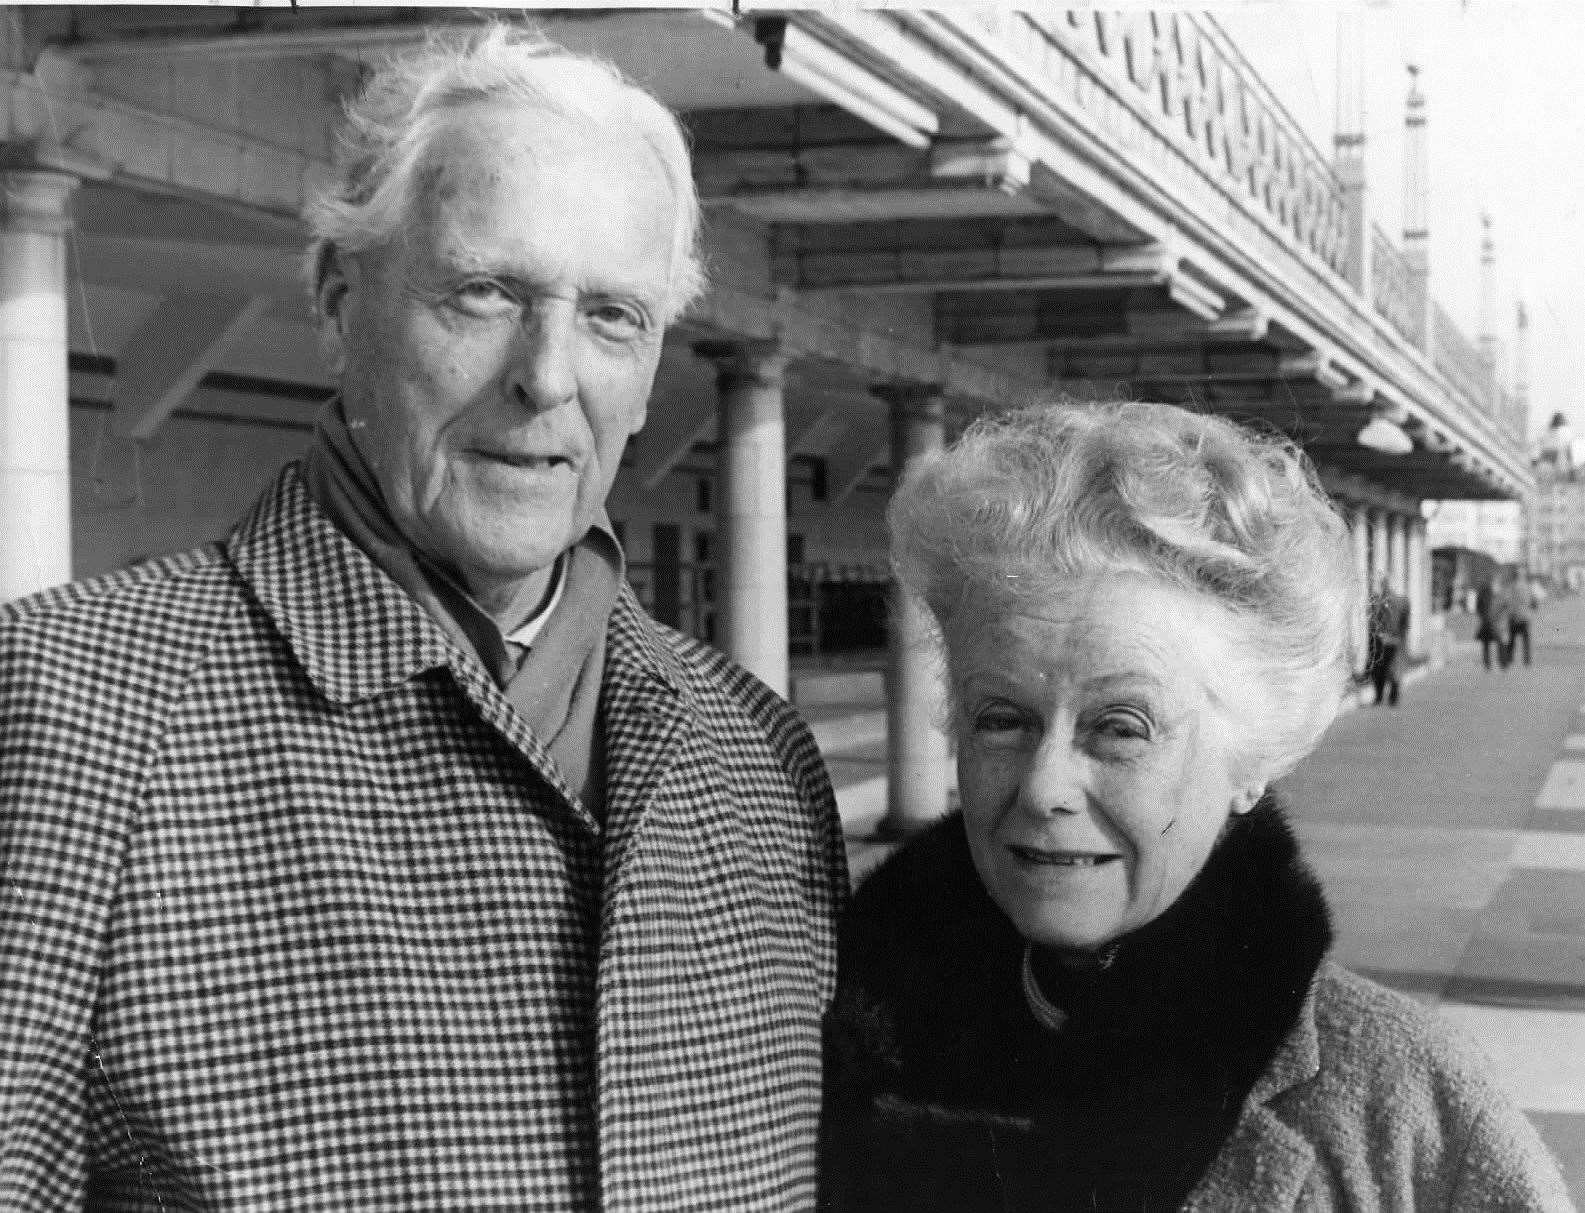 Frank Woolley pictured in 1971, with a friend, Martha Morse